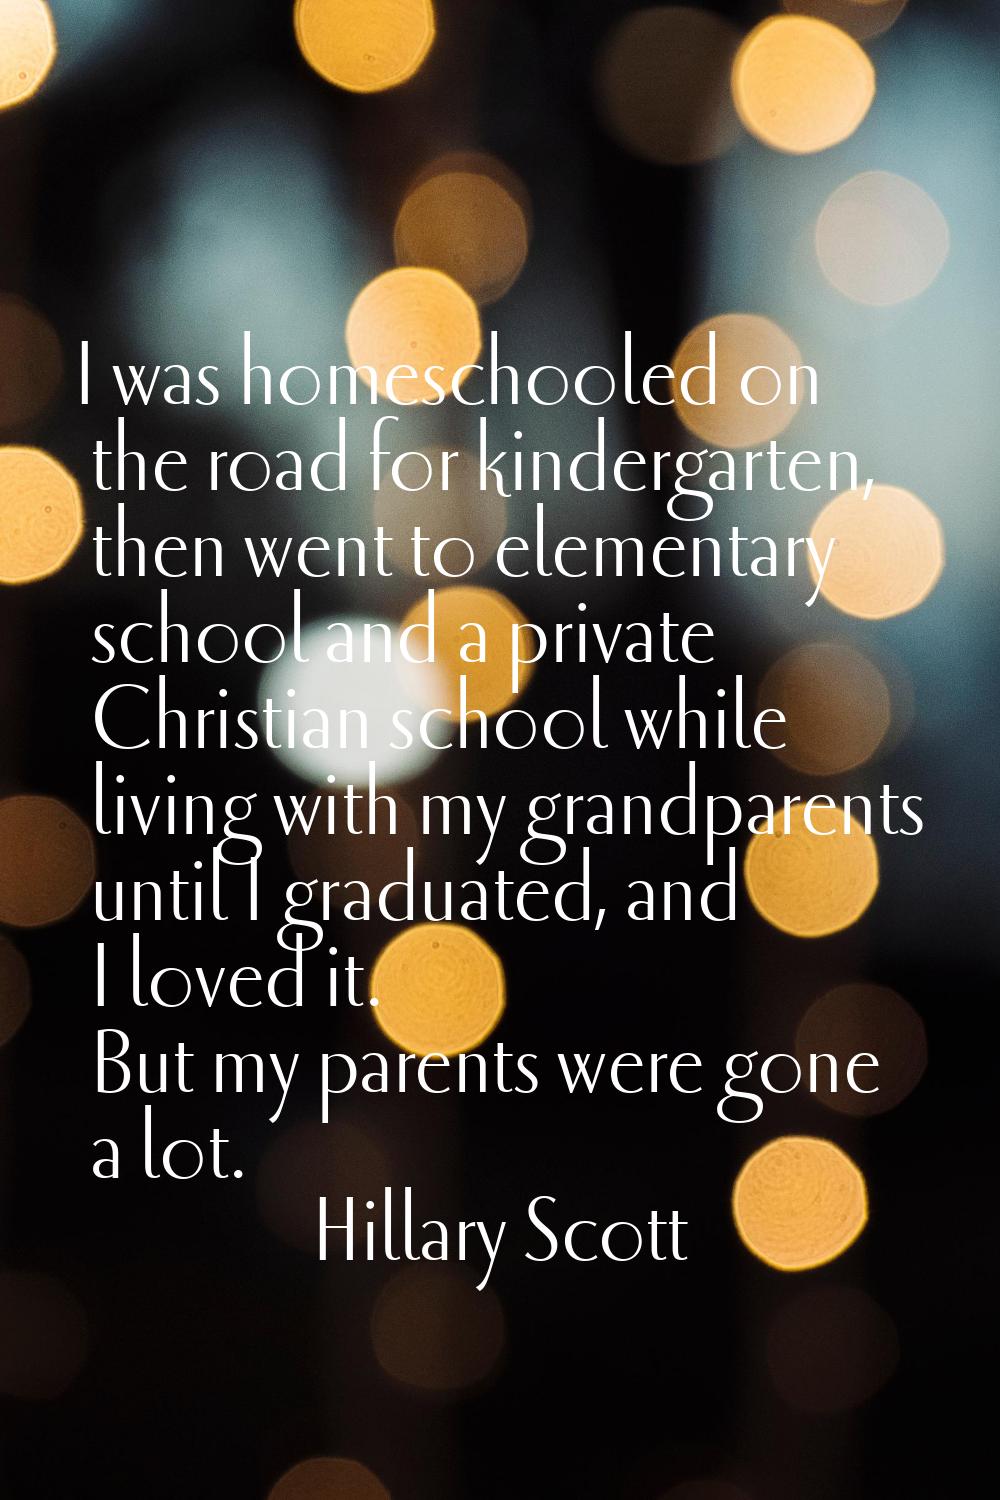 I was homeschooled on the road for kindergarten, then went to elementary school and a private Chris